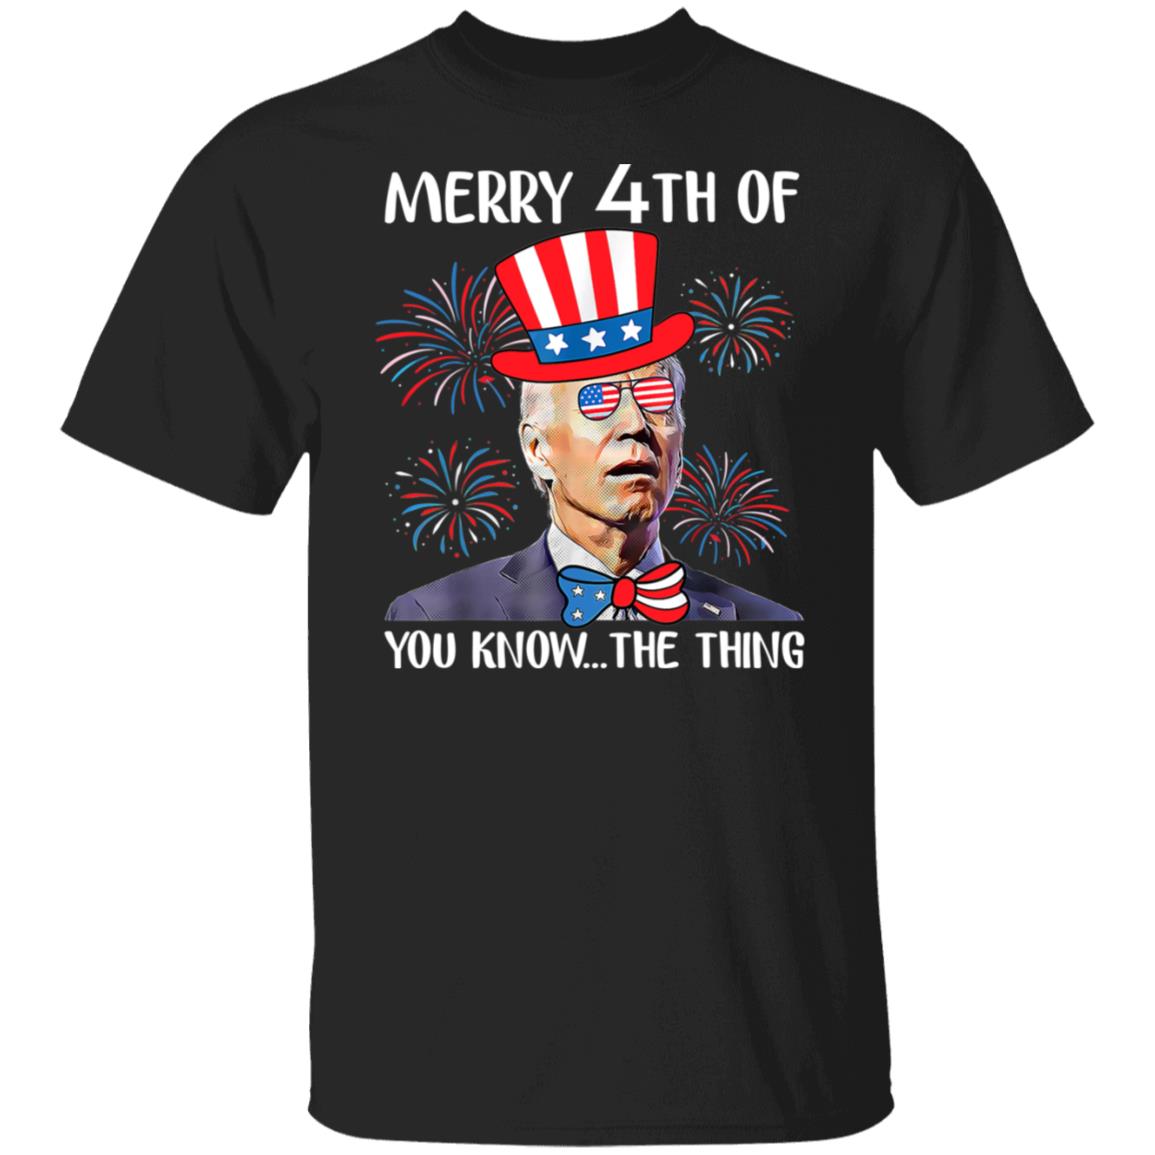 Merry 4th Of You Know The Thing 4th Of July T-Shirt